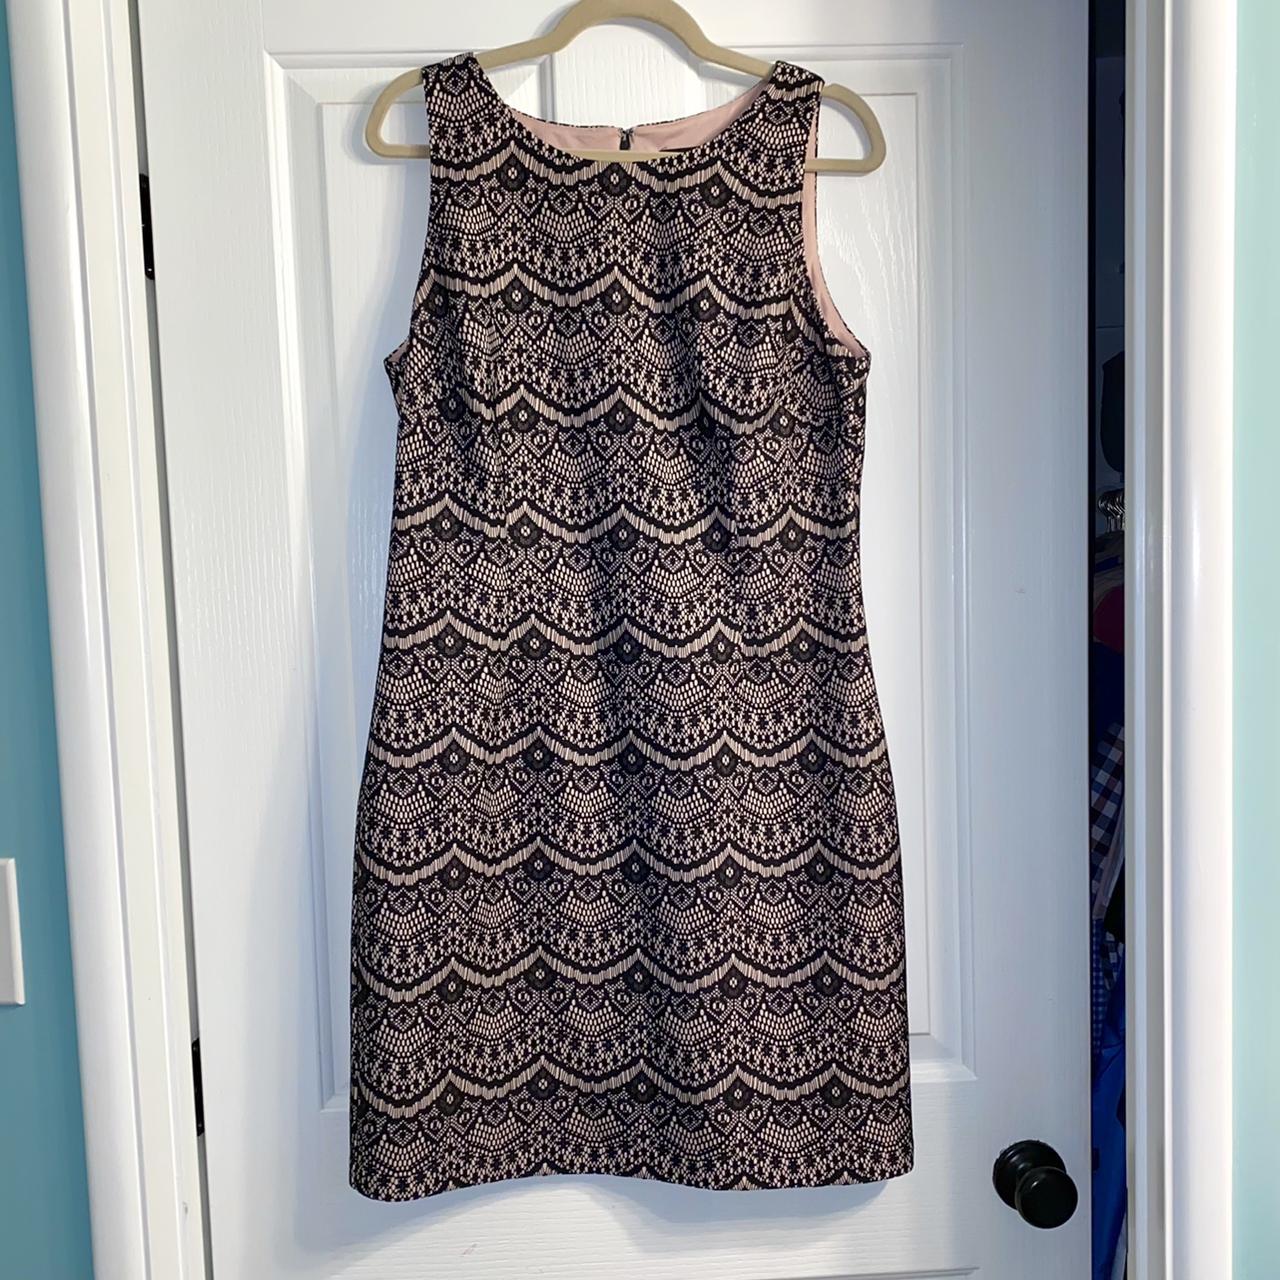 Guess Women's Black and Cream Dress (2)